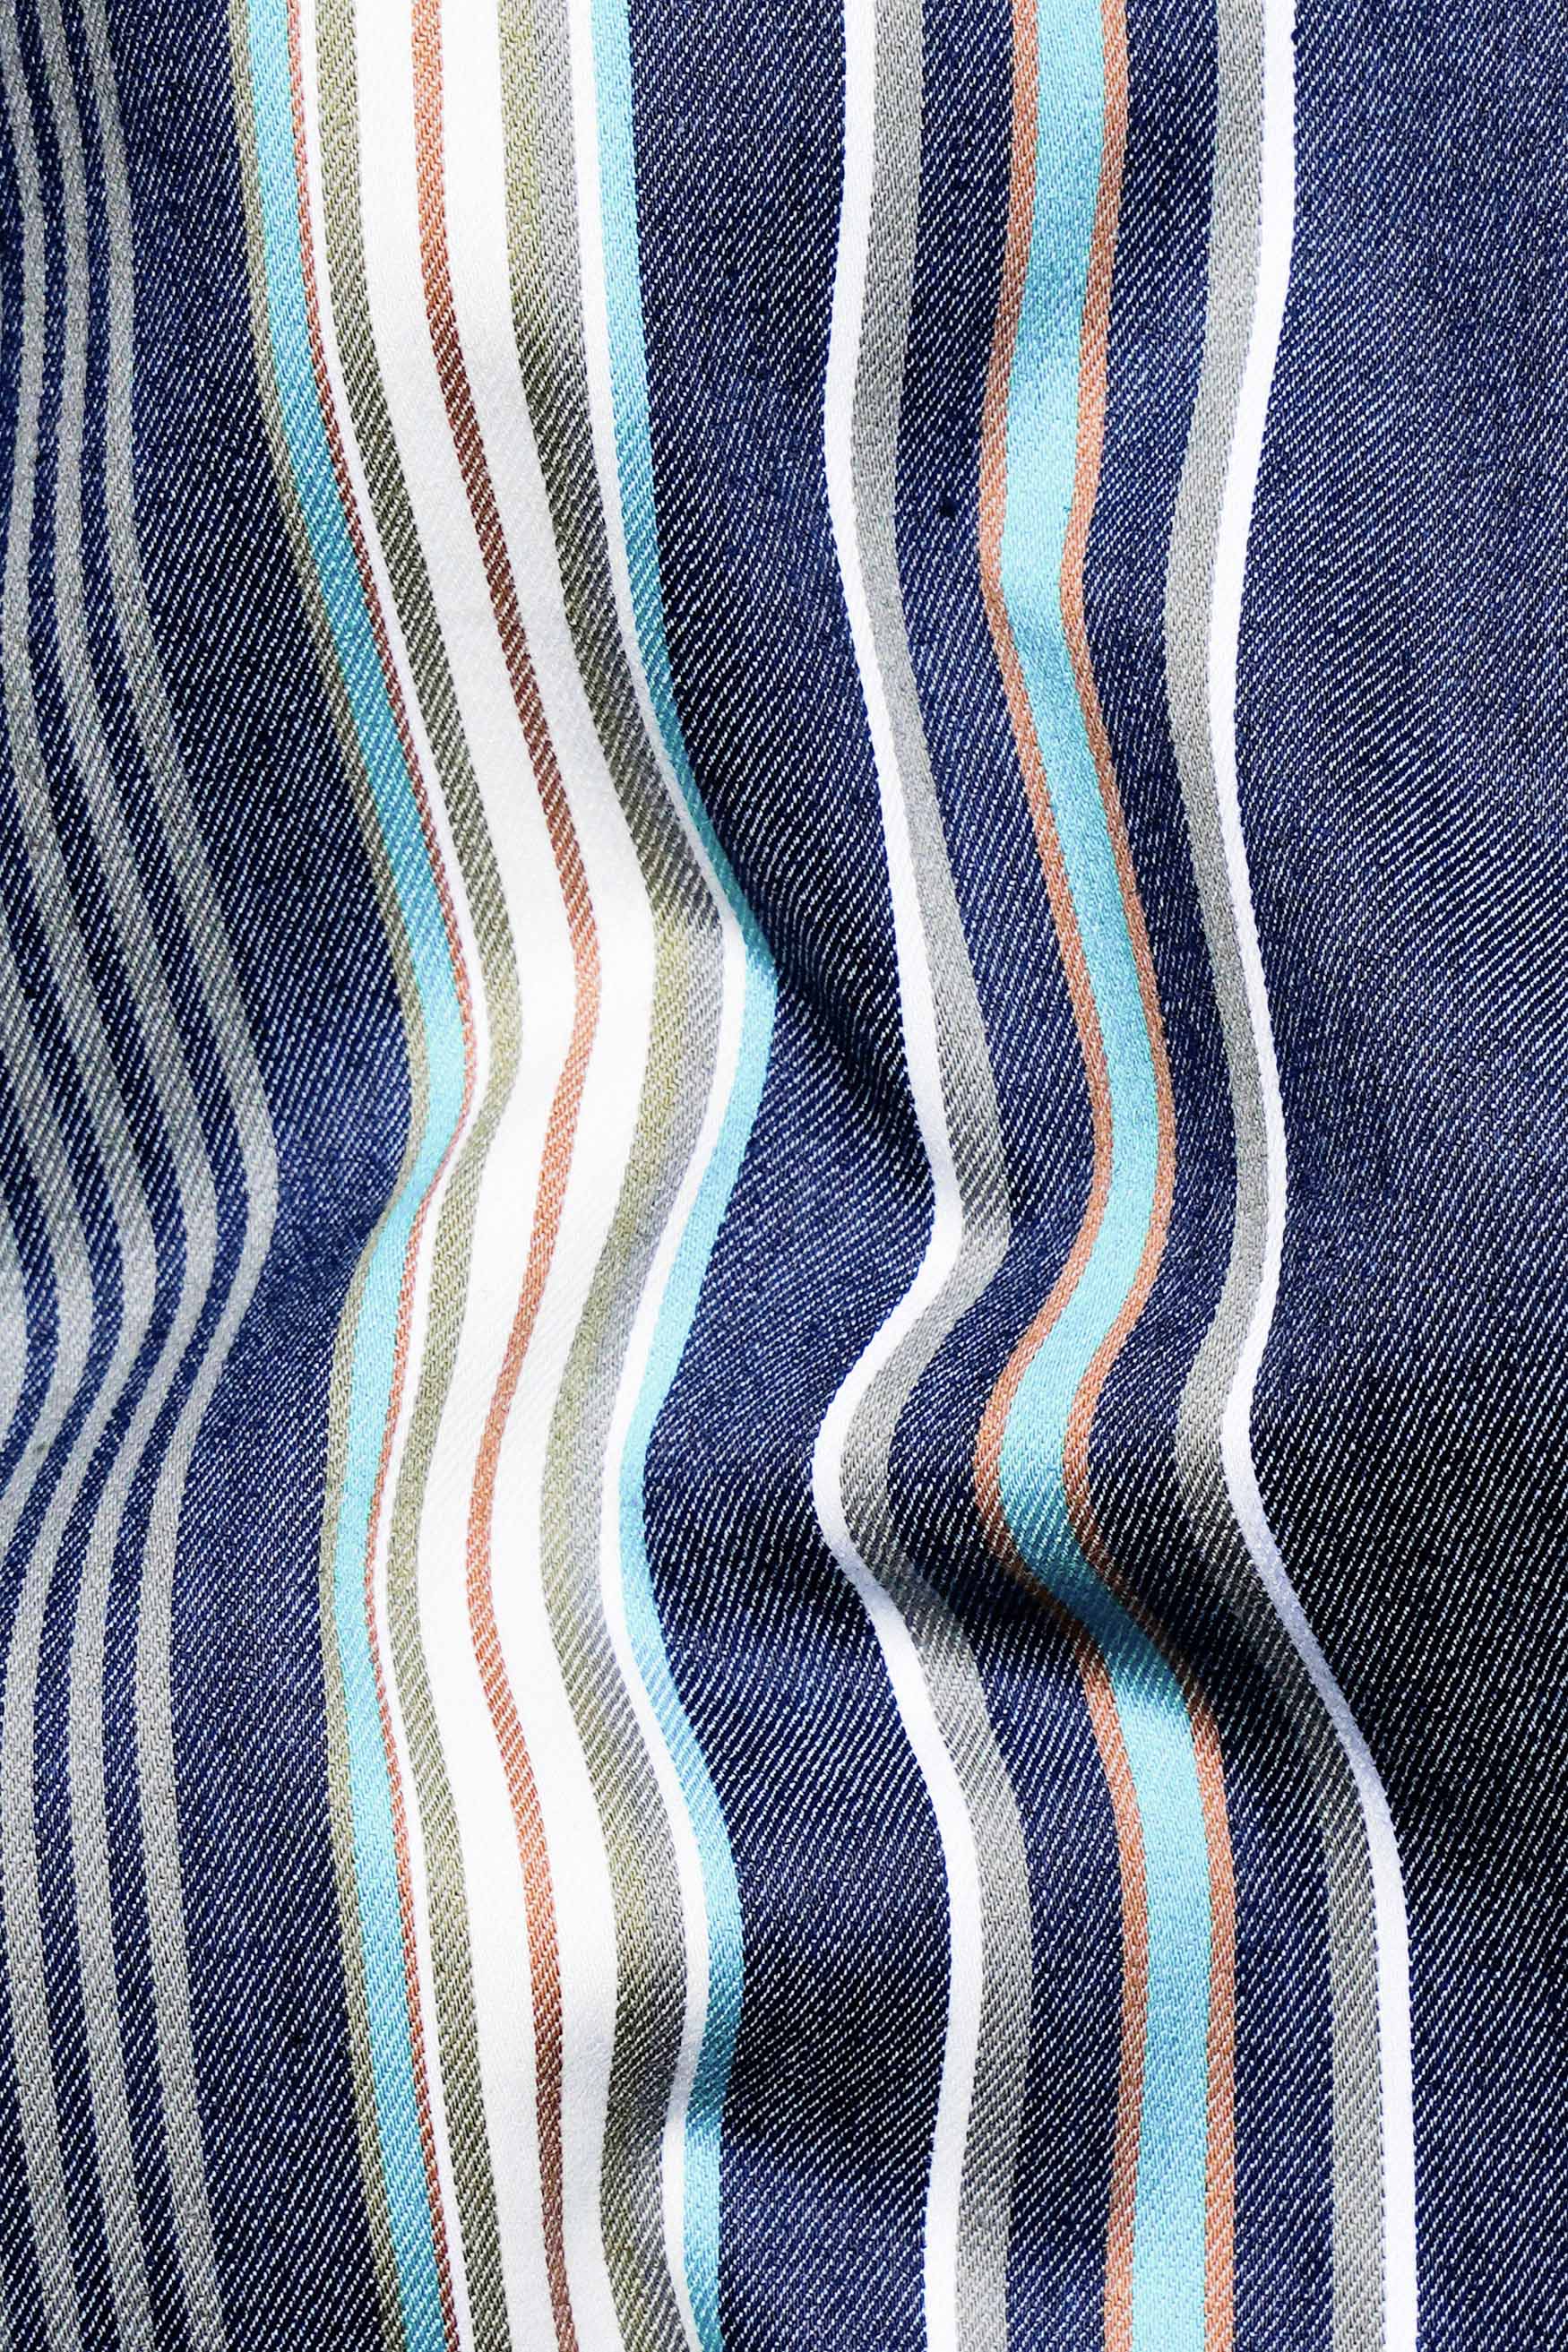 Nile Blue with White and Dusty Brown Striped Indigo Denim Shirt